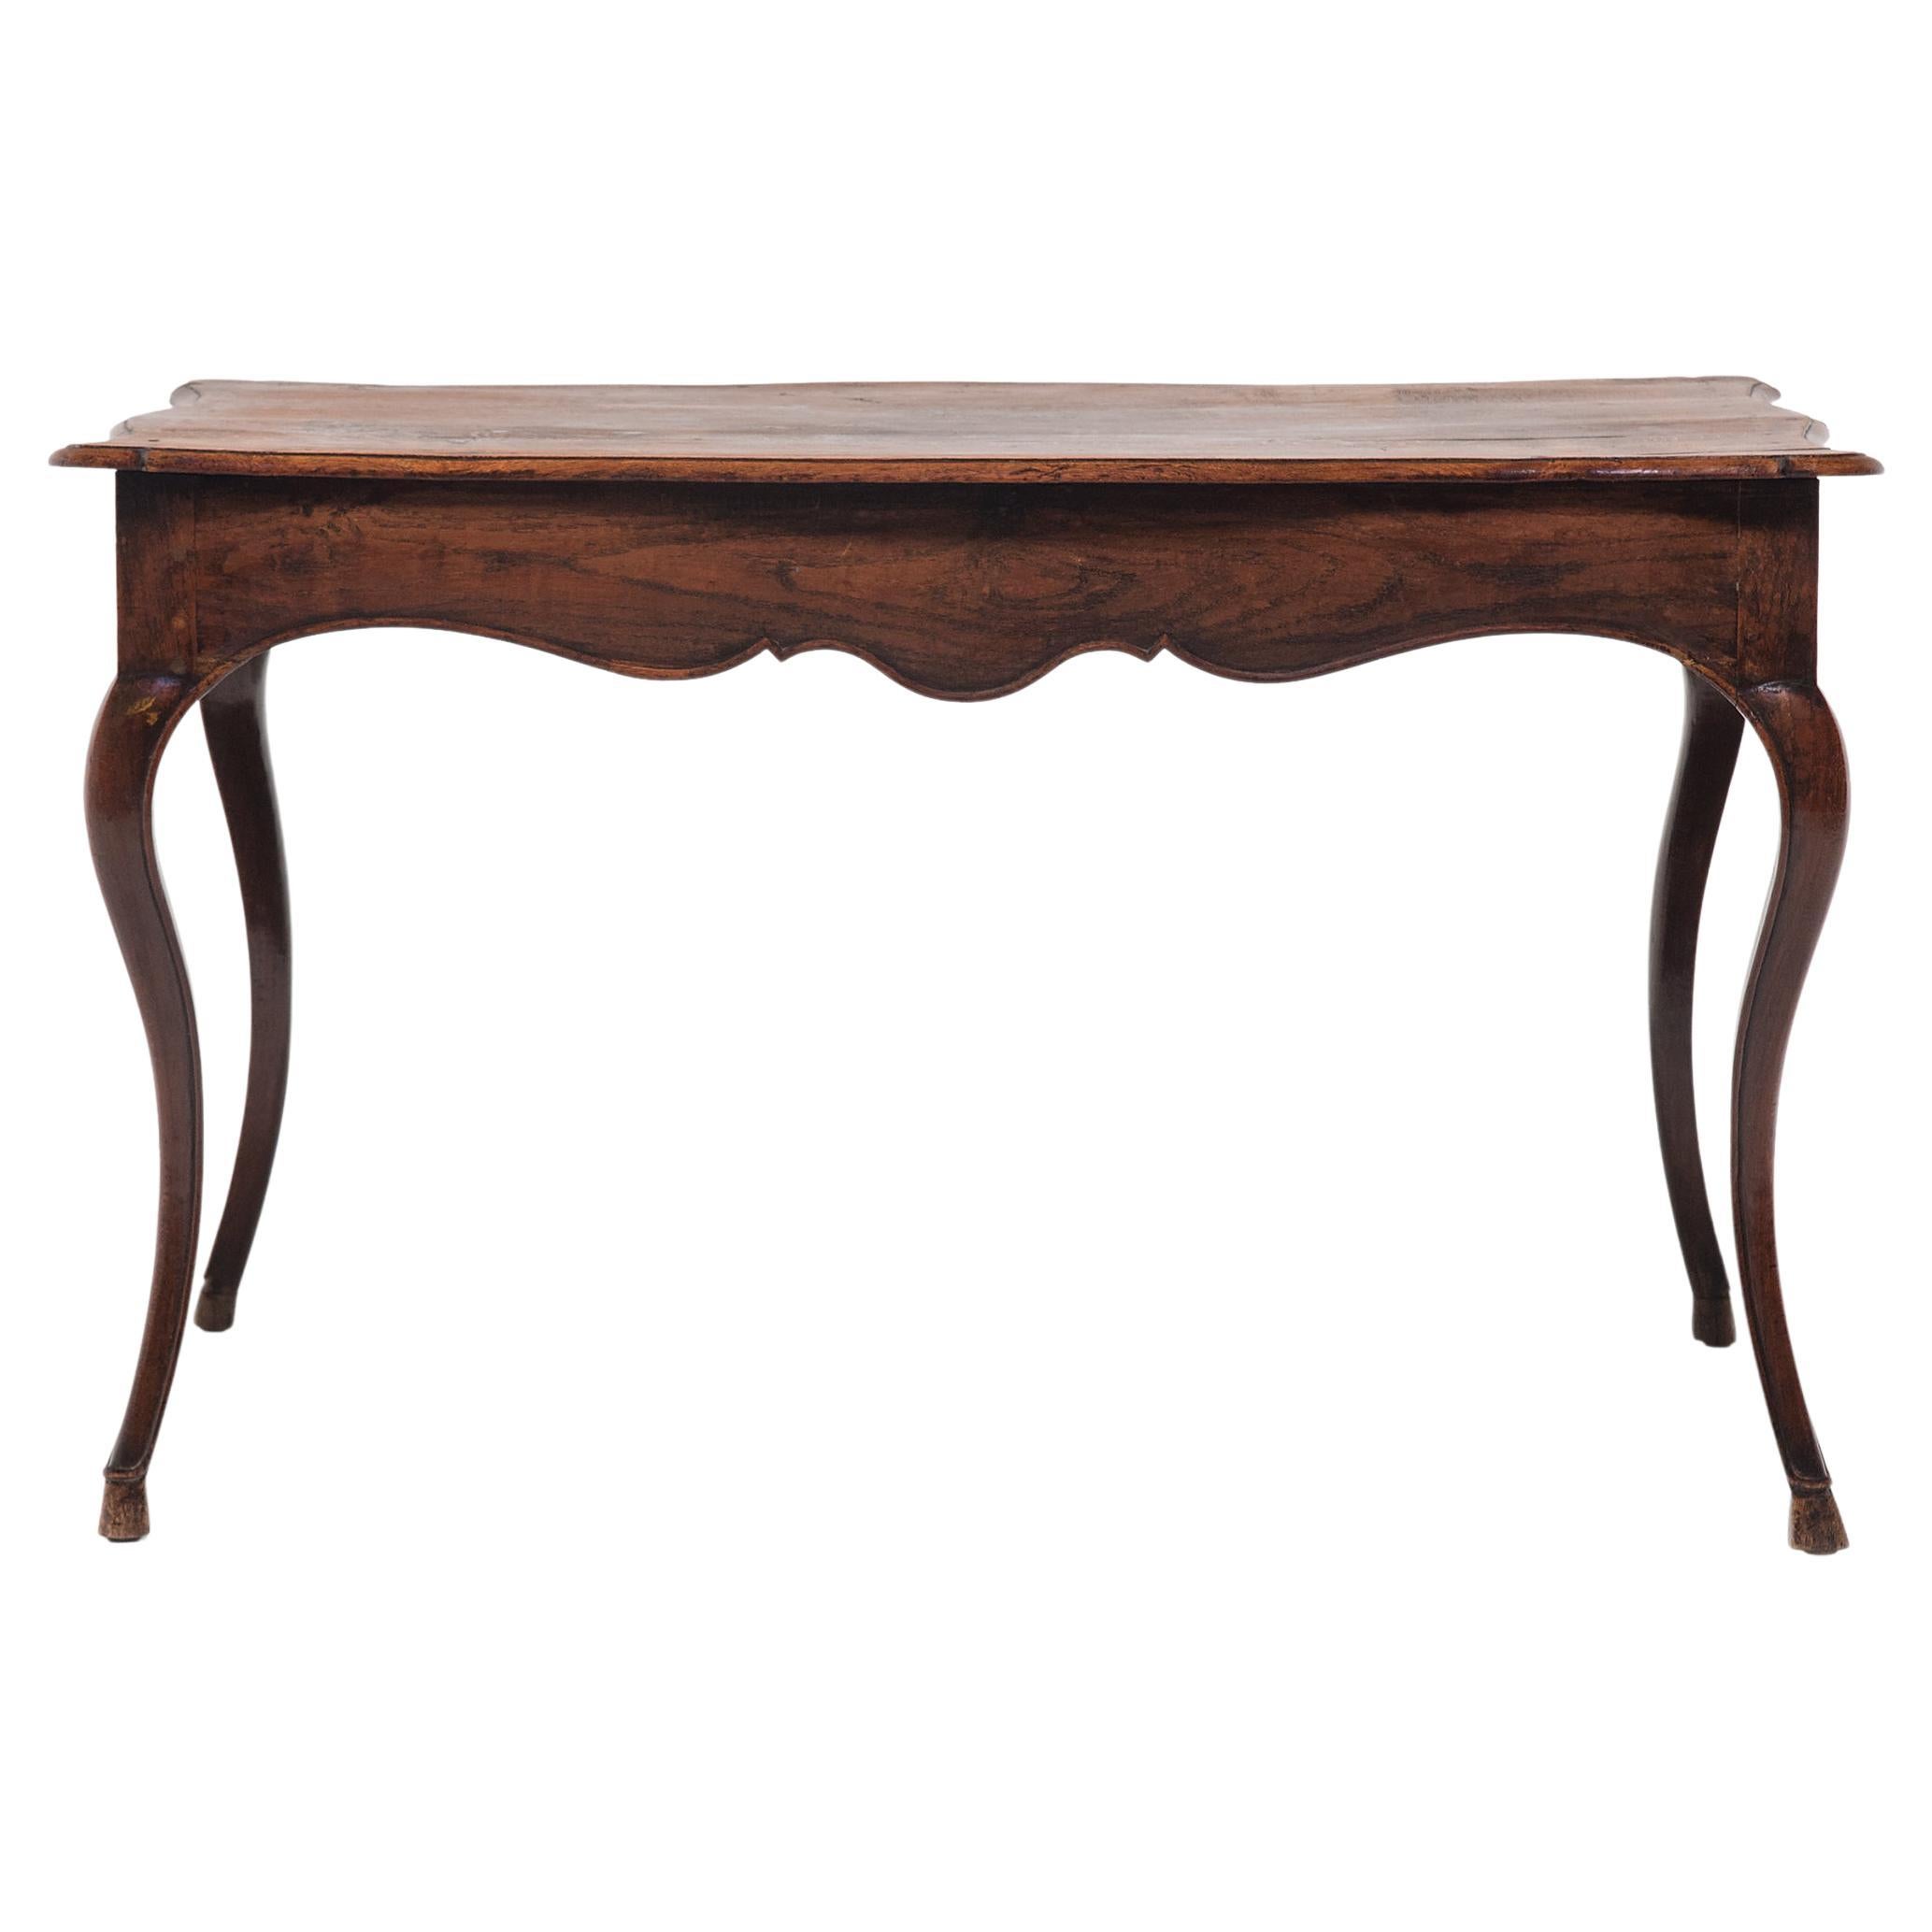 French Louis XV-Style Tea Table with Cabriole Legs, c. 1900 For Sale